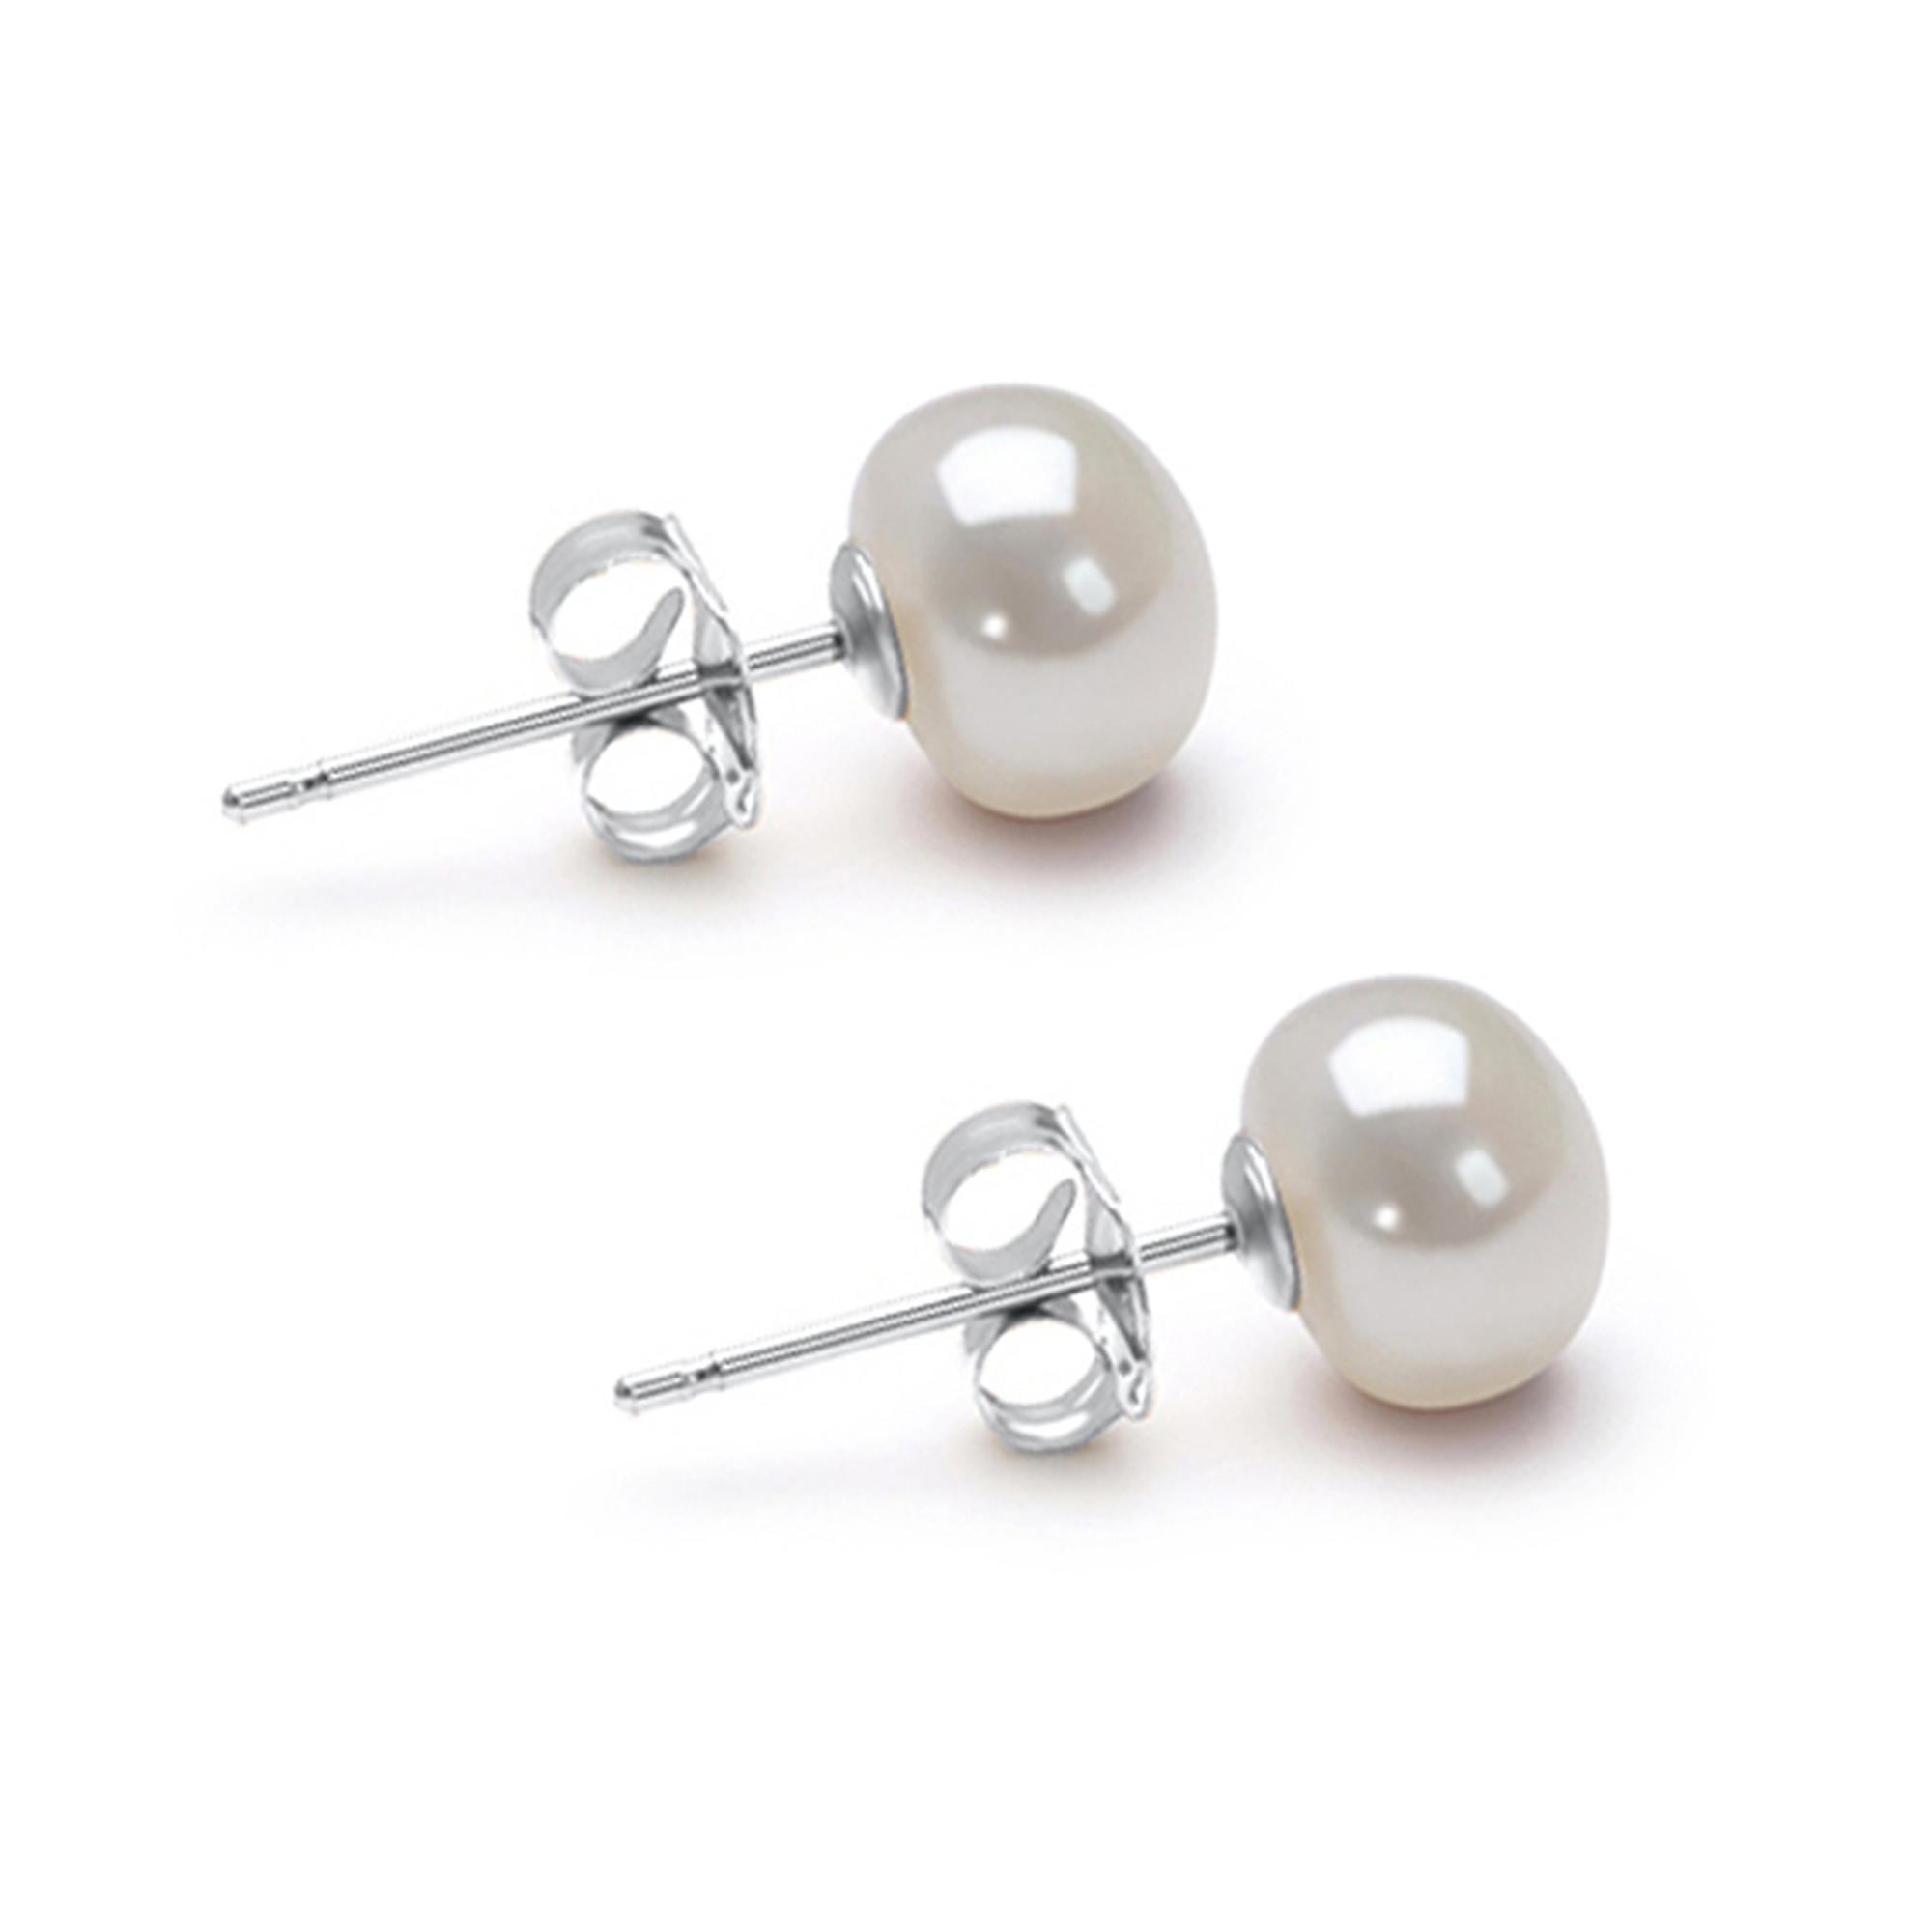 Orien Jewelry 5-11mm AA White Freshwater Pearl Dangle Earrings 925 Sterling Silver Settings and Matching Push Backs